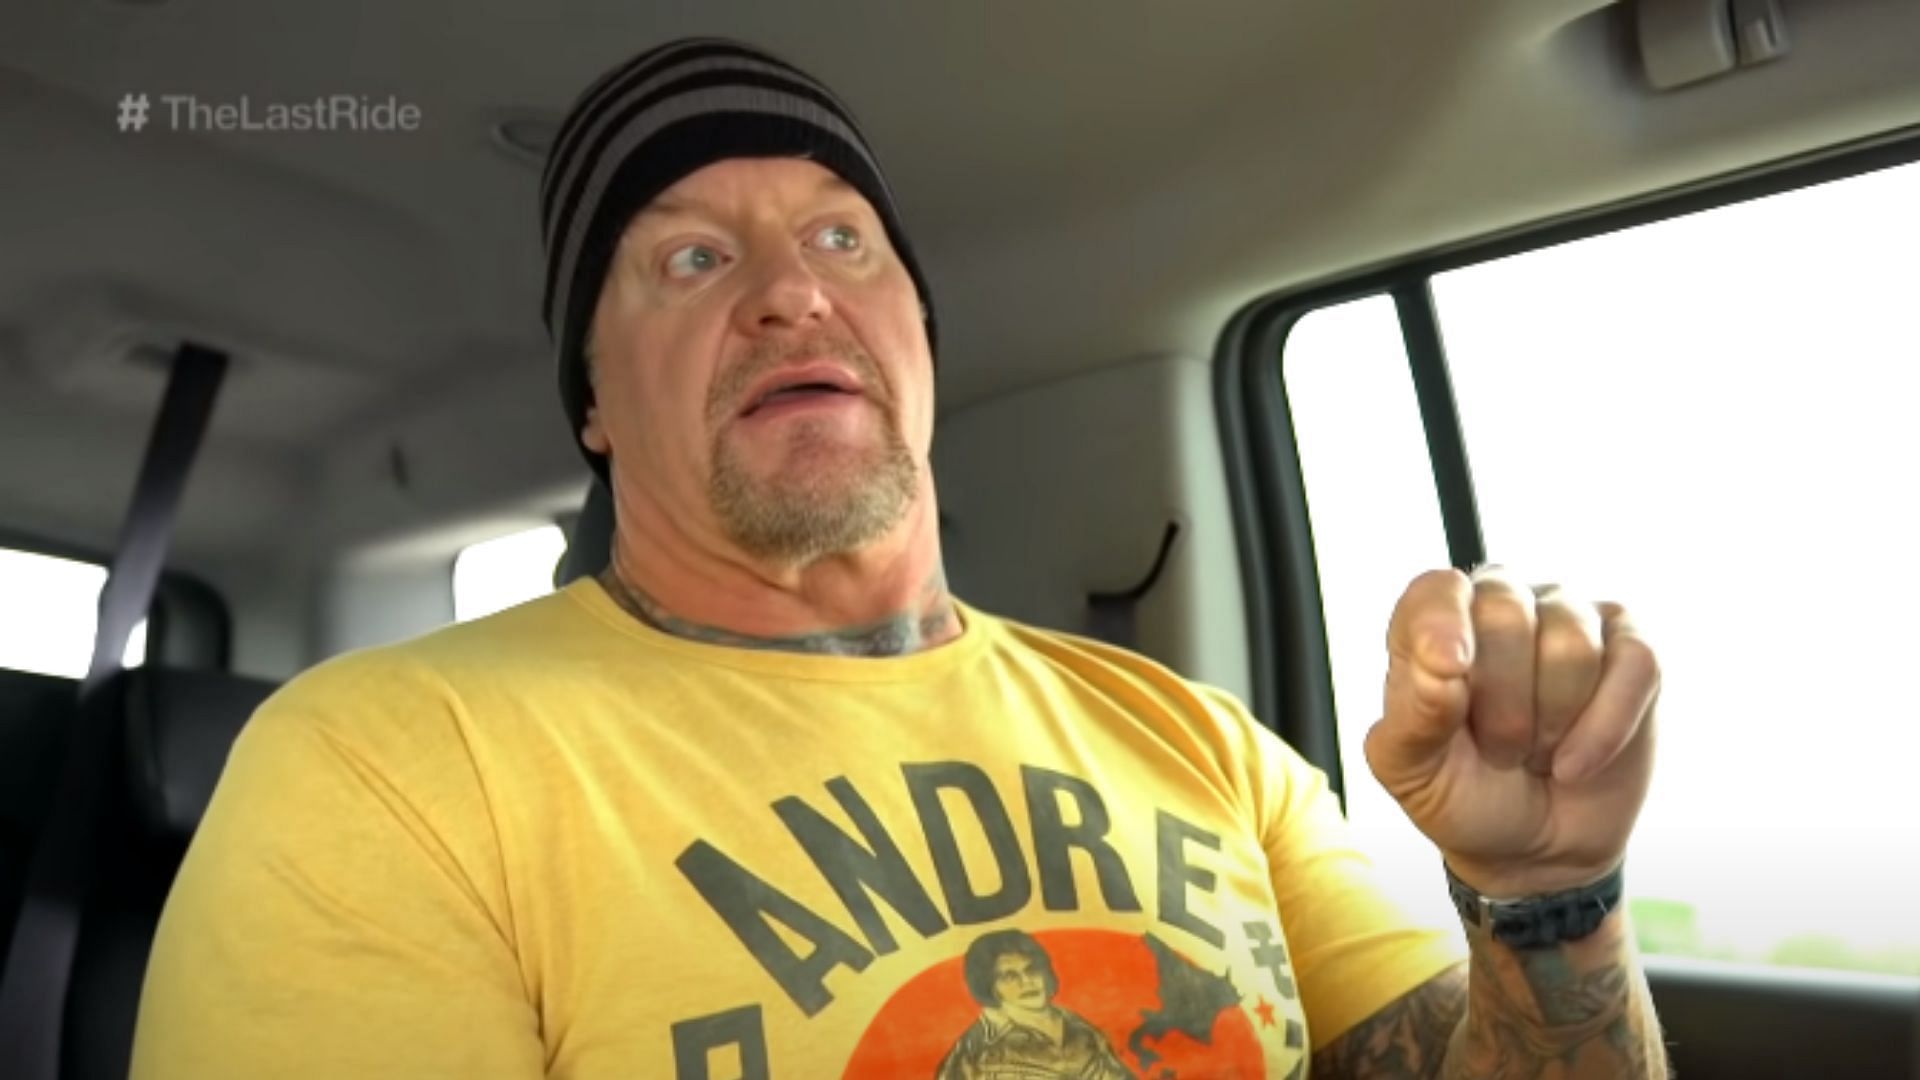 The Undertaker worked for WCW before joining WWE